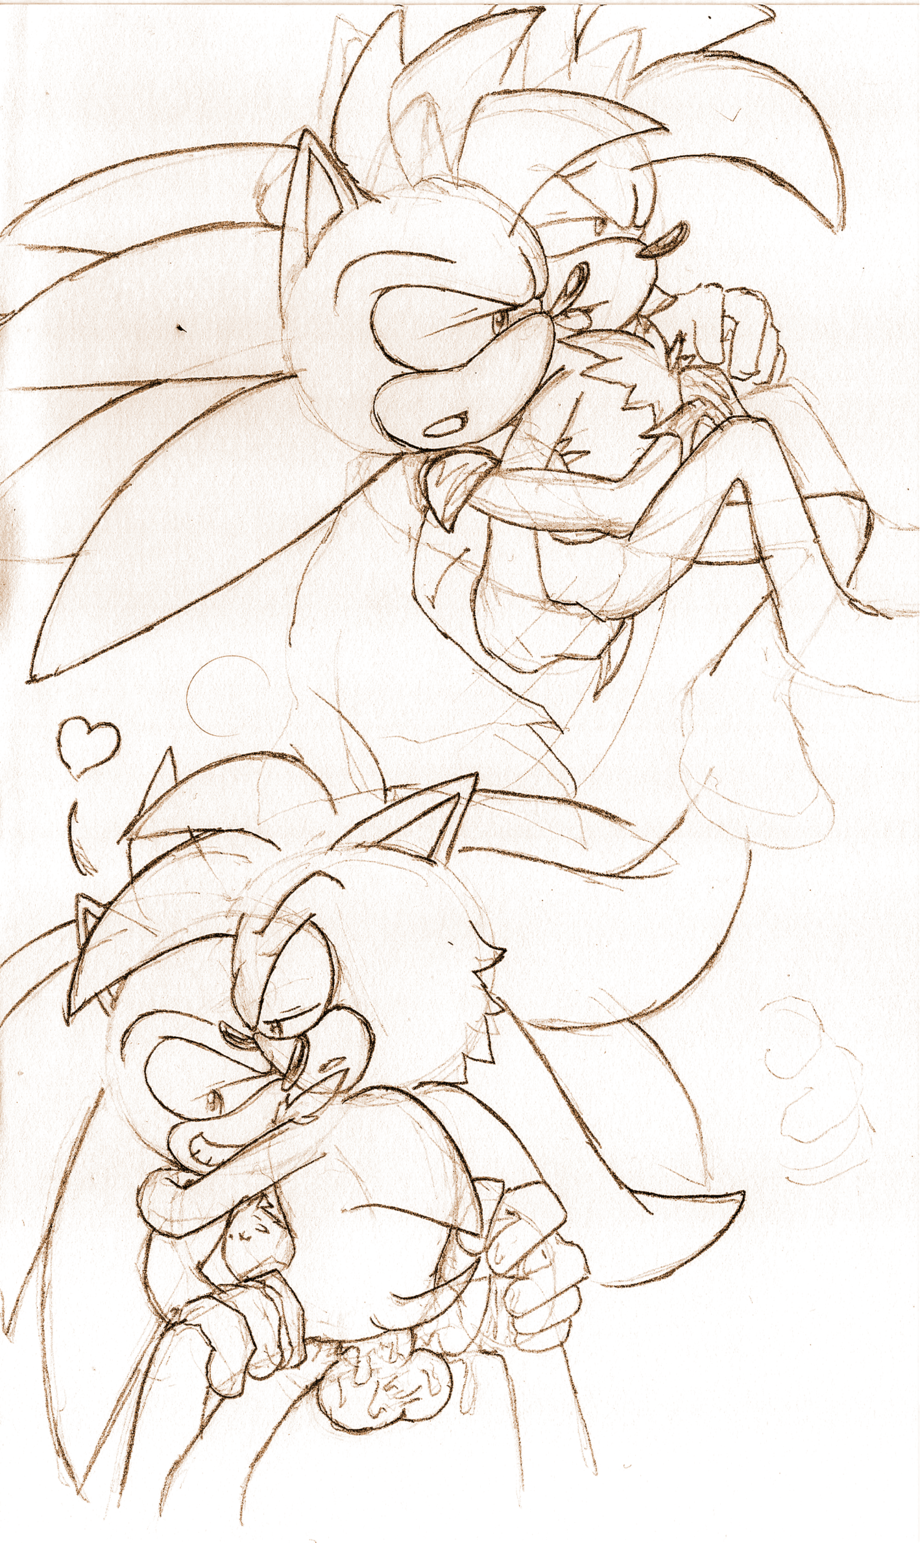 Ychan - g - sonic and (very good) friends - sonic